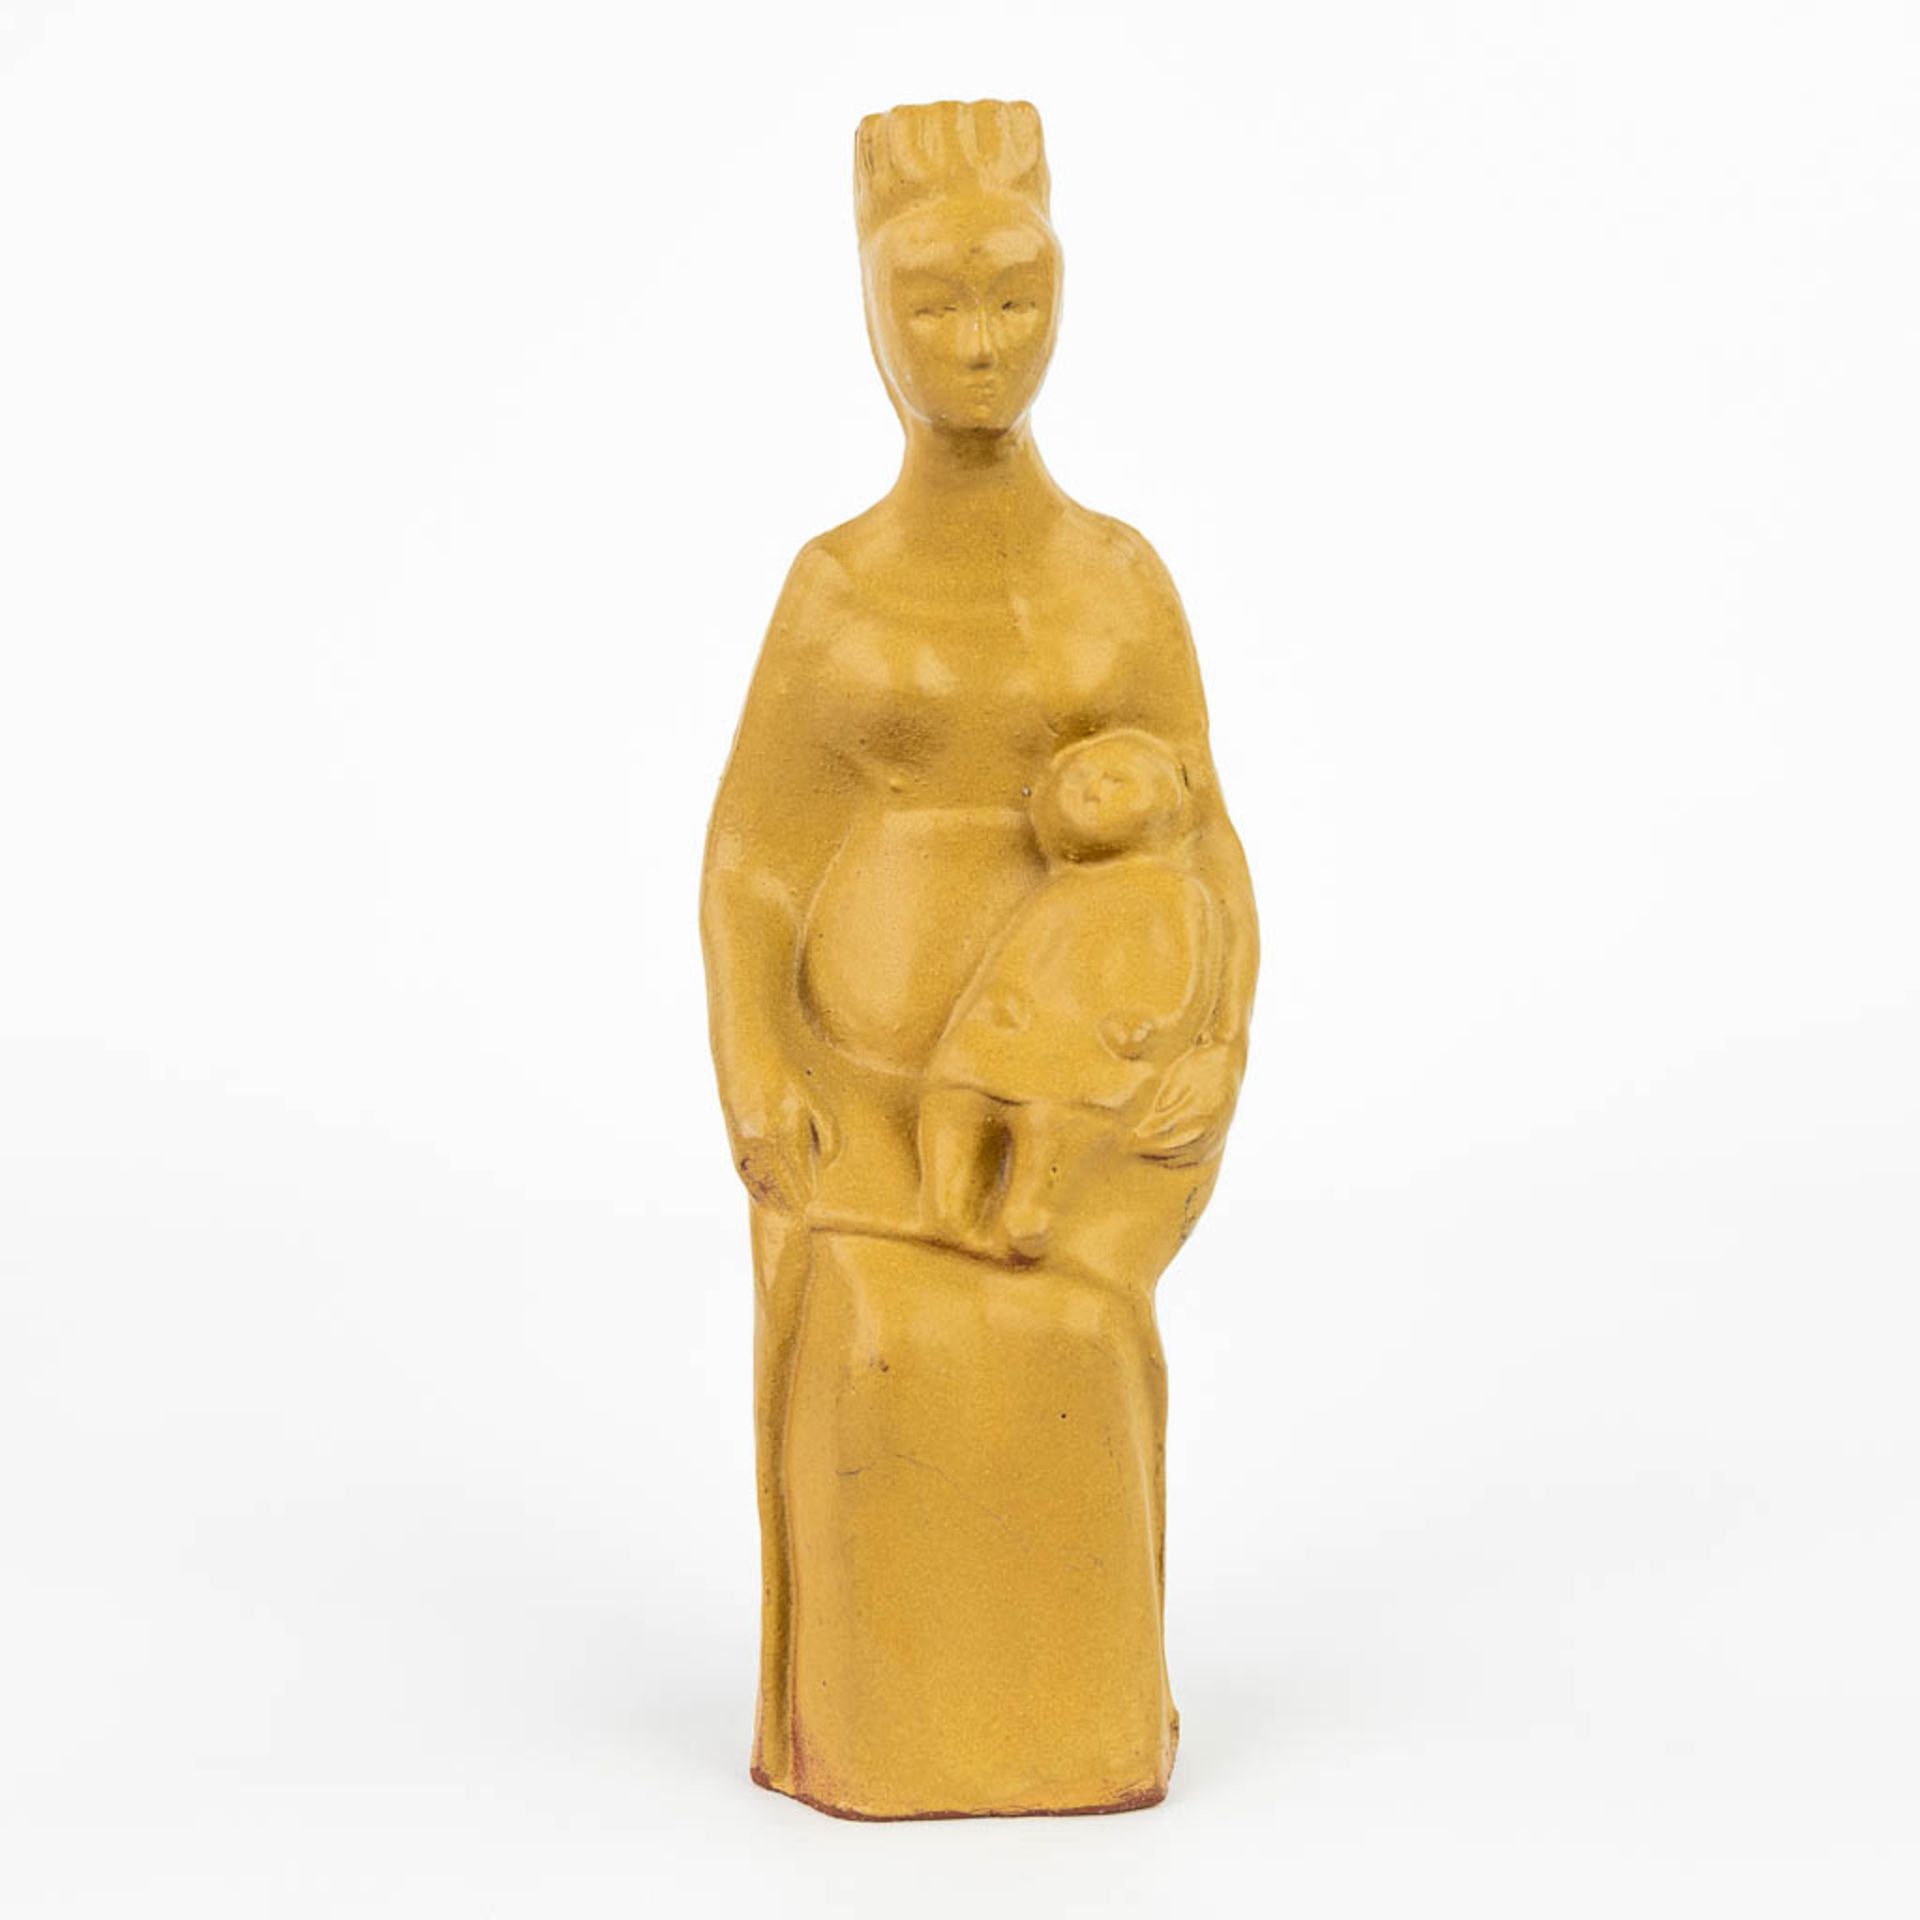 A statue of Madonna with a child made by Perignem. (H:25cm) - Image 10 of 10